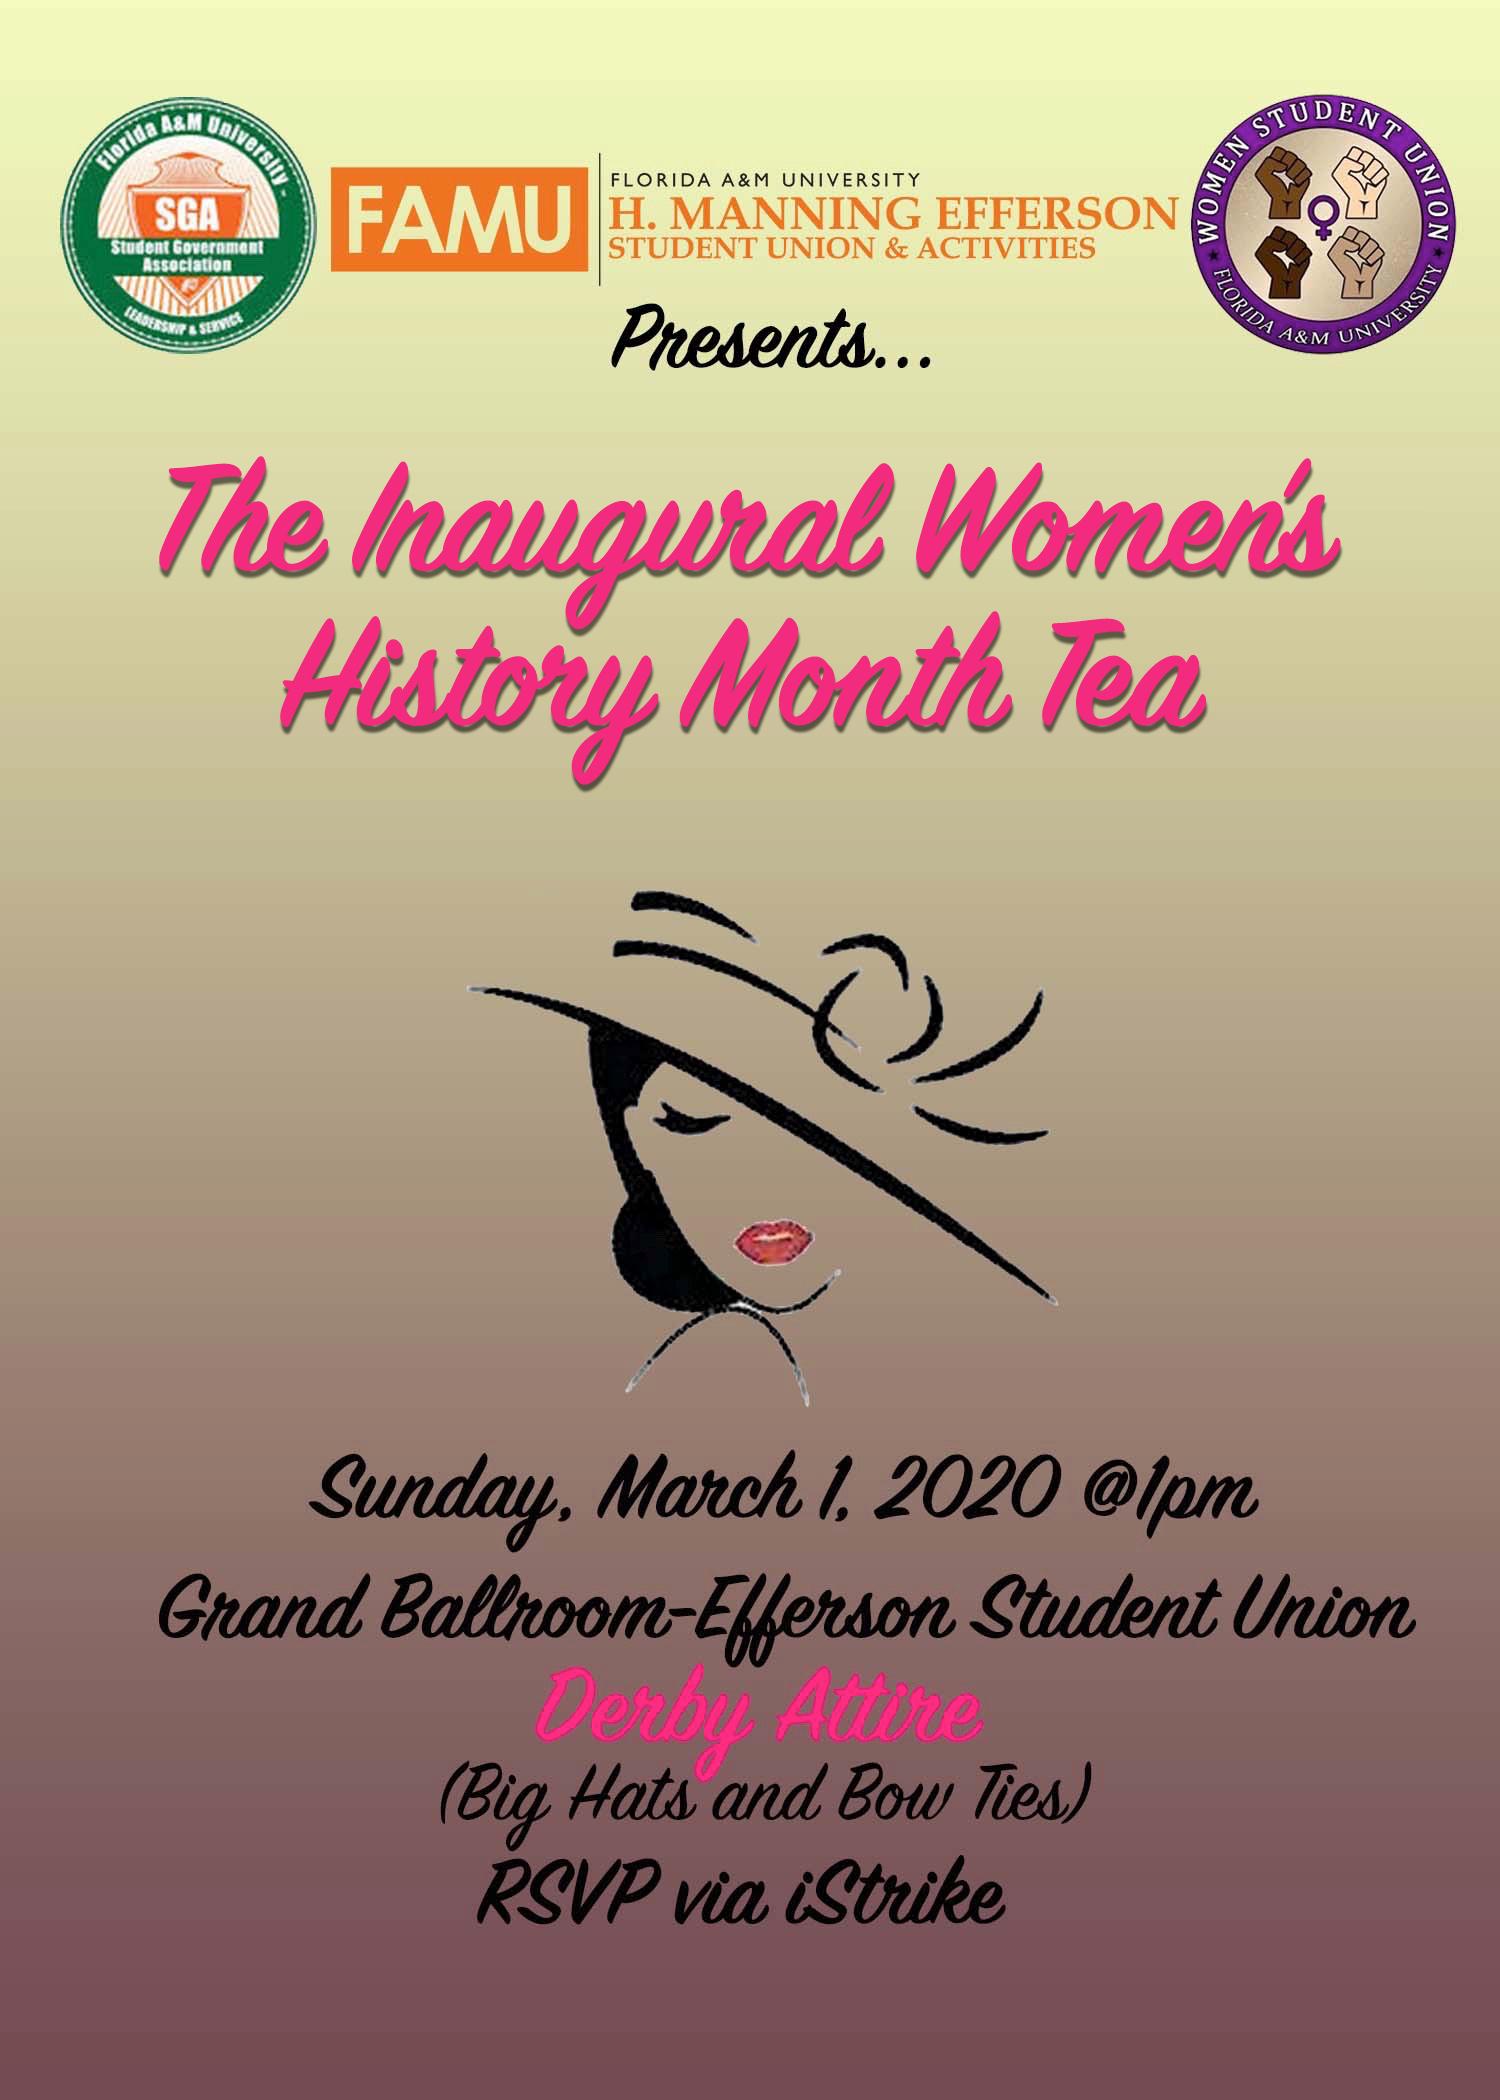 The Efferson Student Union's Inaugural Women's History Month Tea